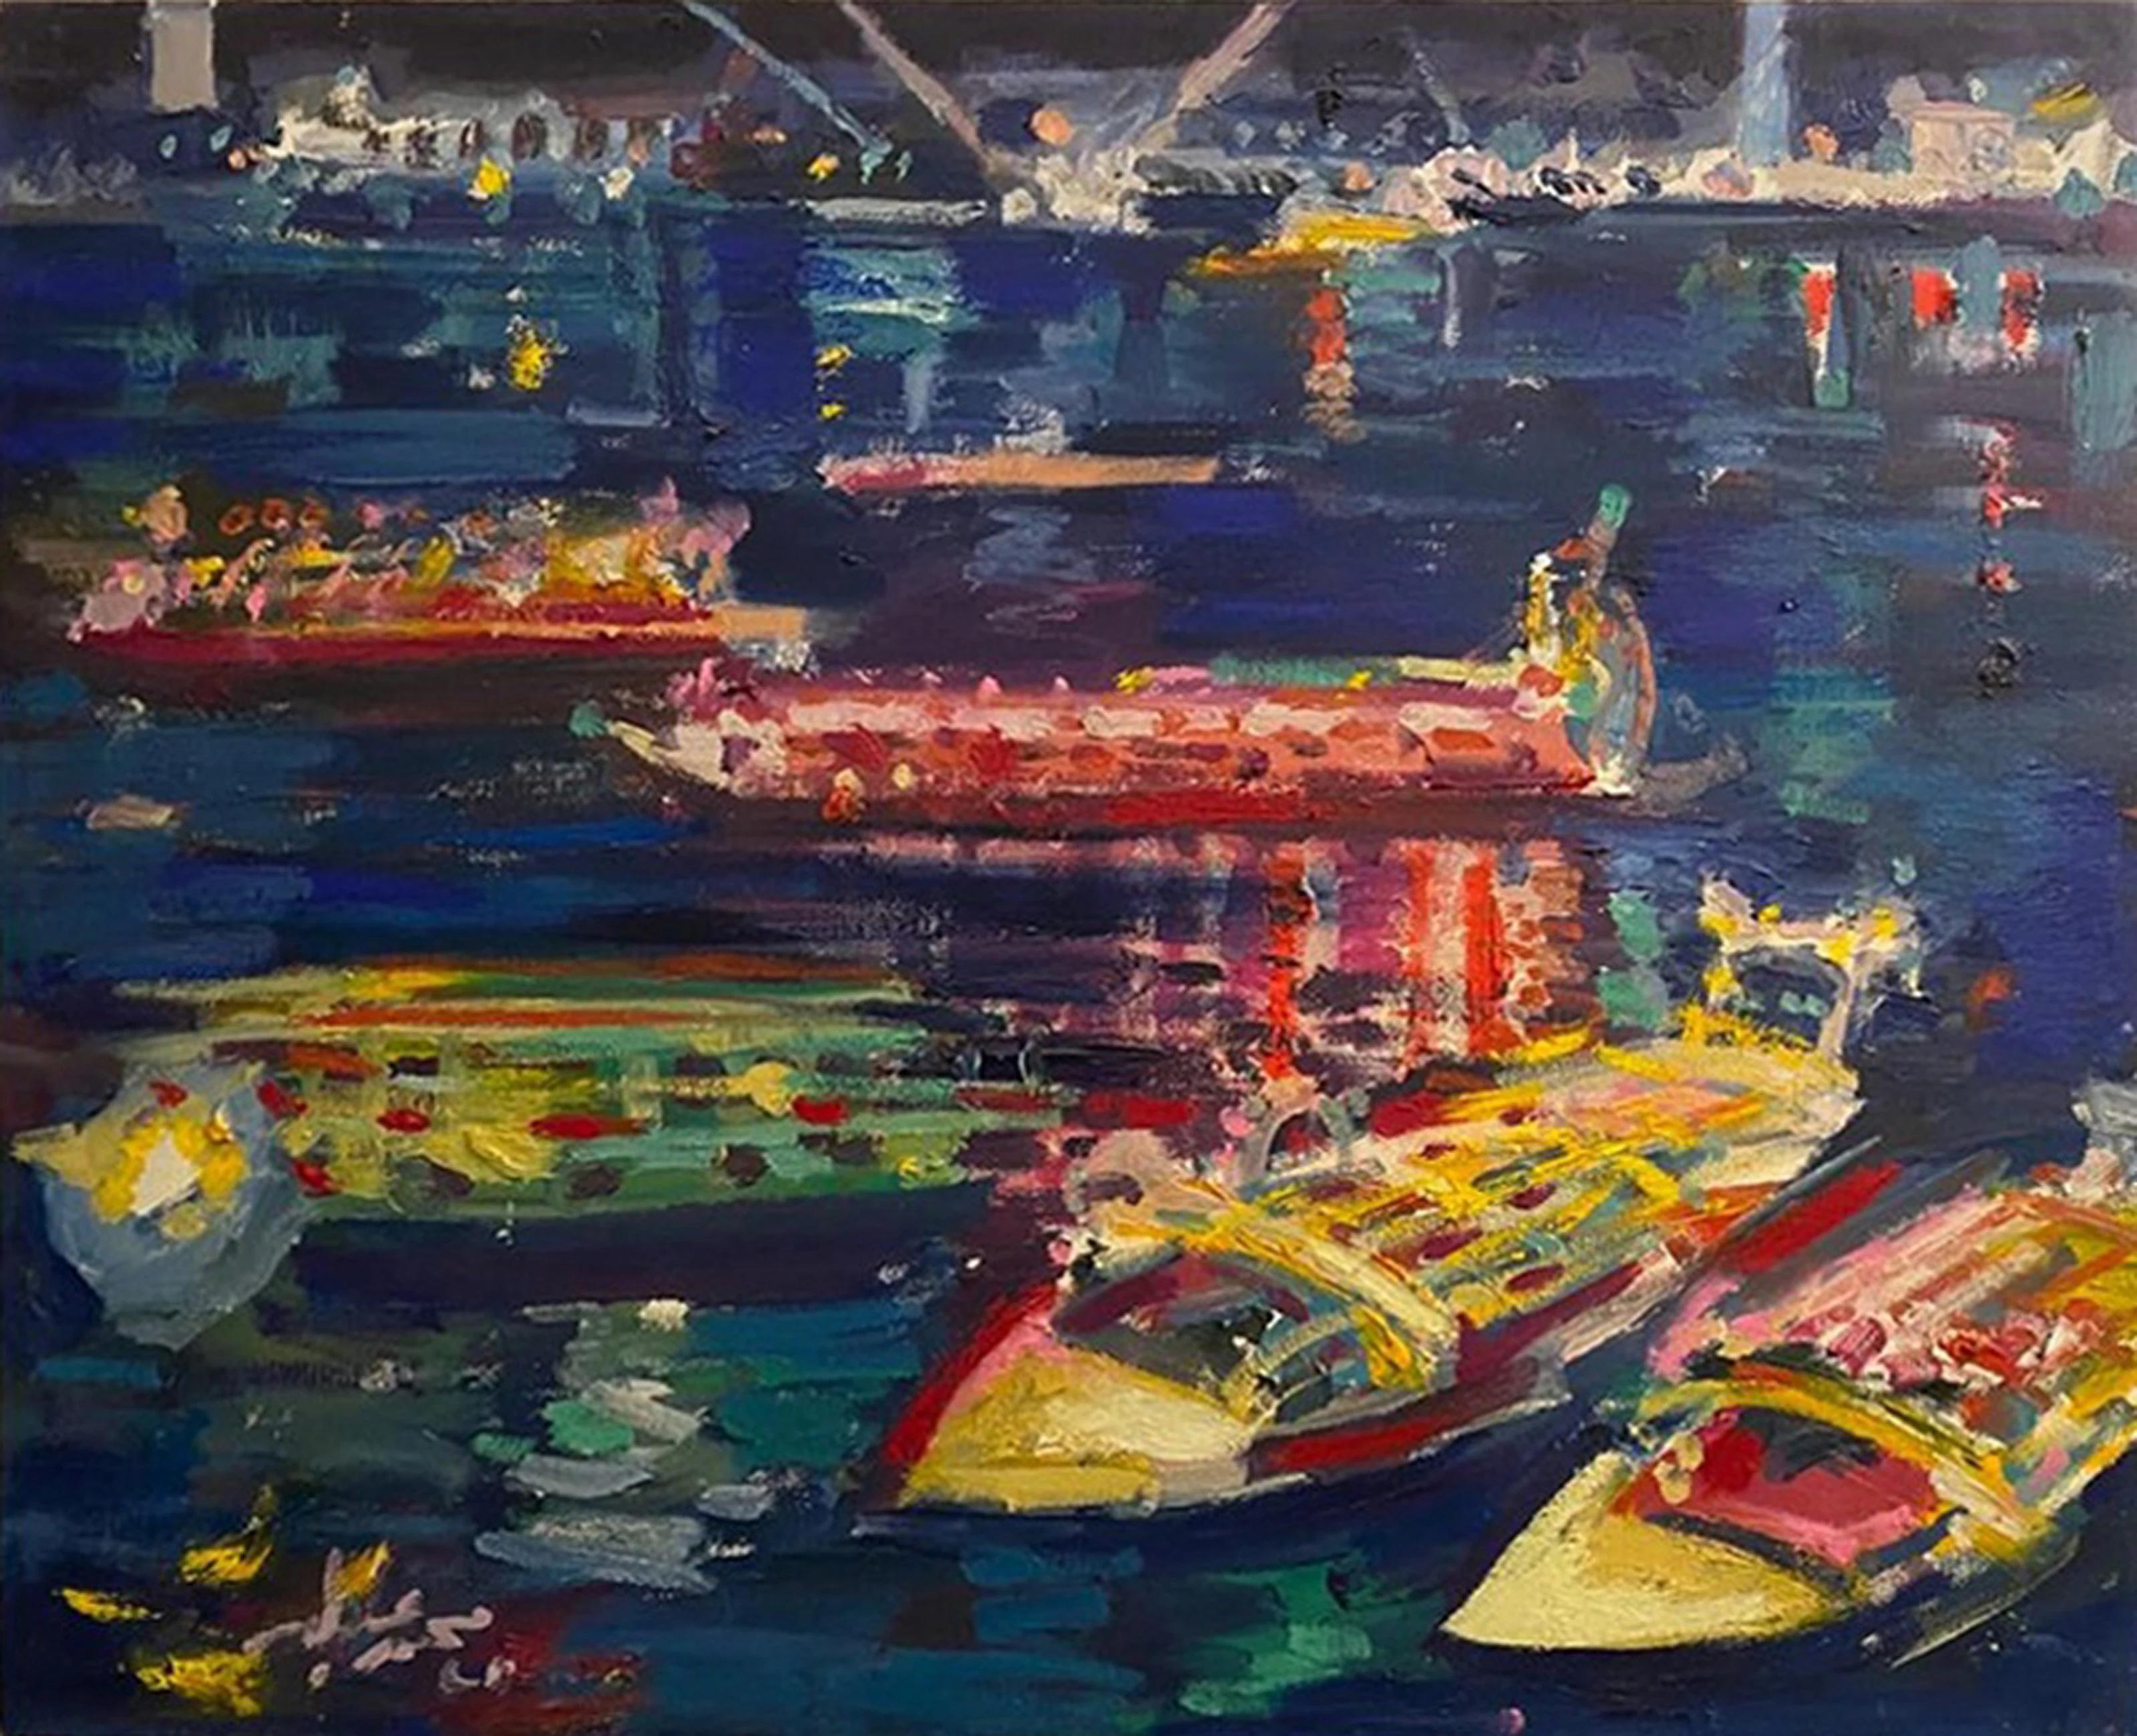 "Nile by Night VII" Painting 20" x 24" inch by Mohamed Abla

Mohamed Abla was born in Mansoura (North of Egypt) in 1953. There he spent his childhood and finished school. In 1973 he moved to Alexandria to start a five-year art study at the faculty